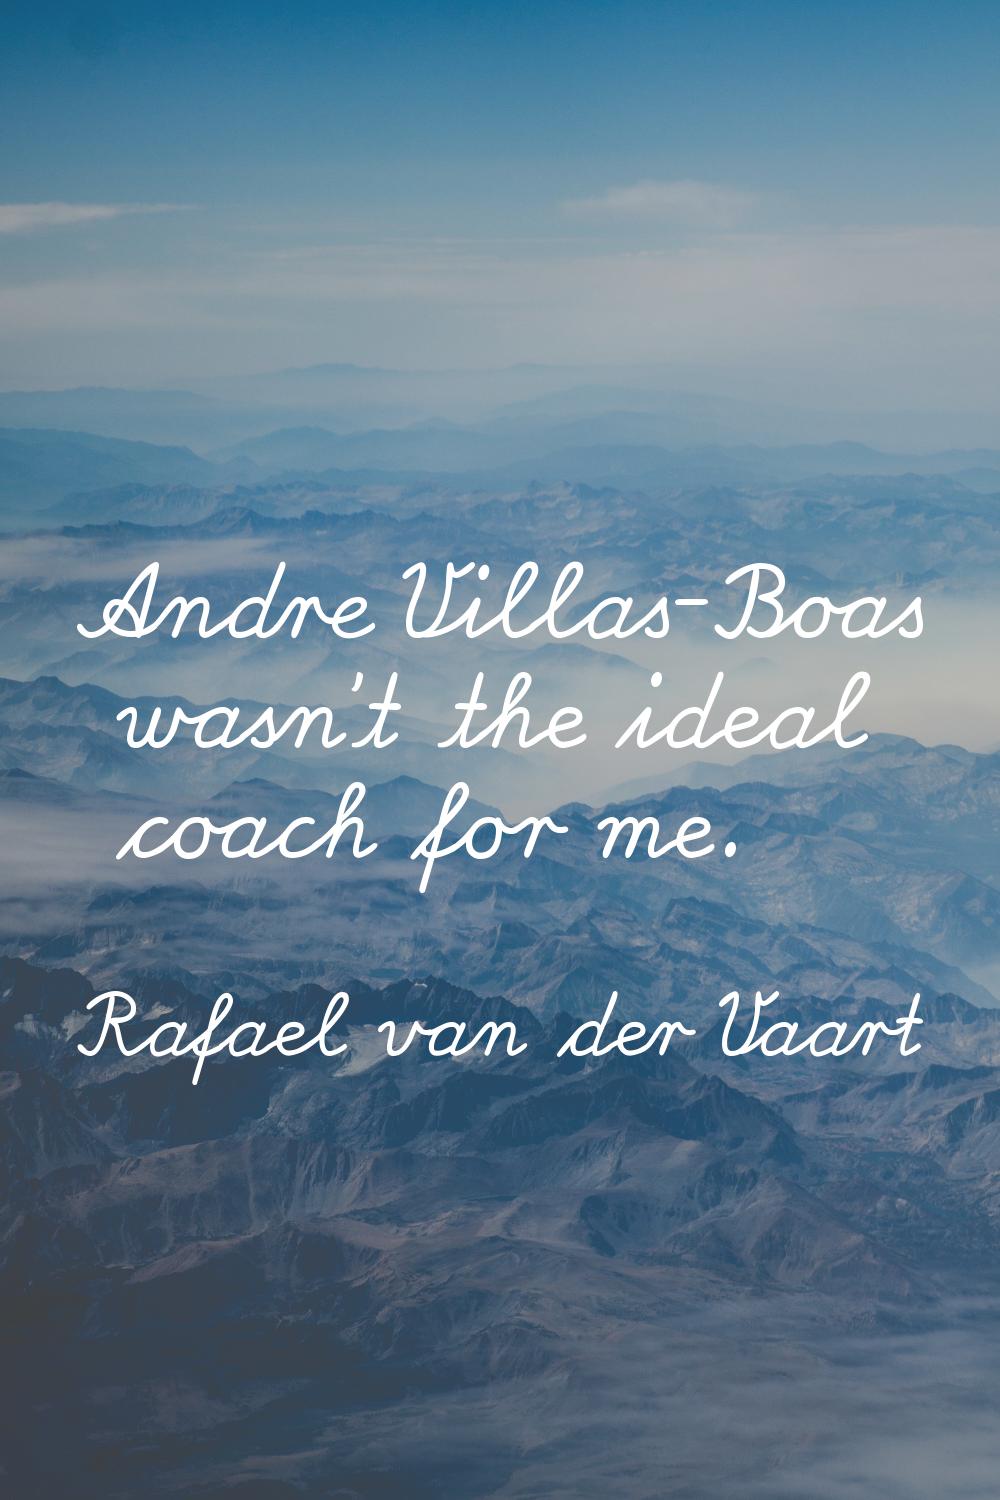 Andre Villas-Boas wasn't the ideal coach for me.